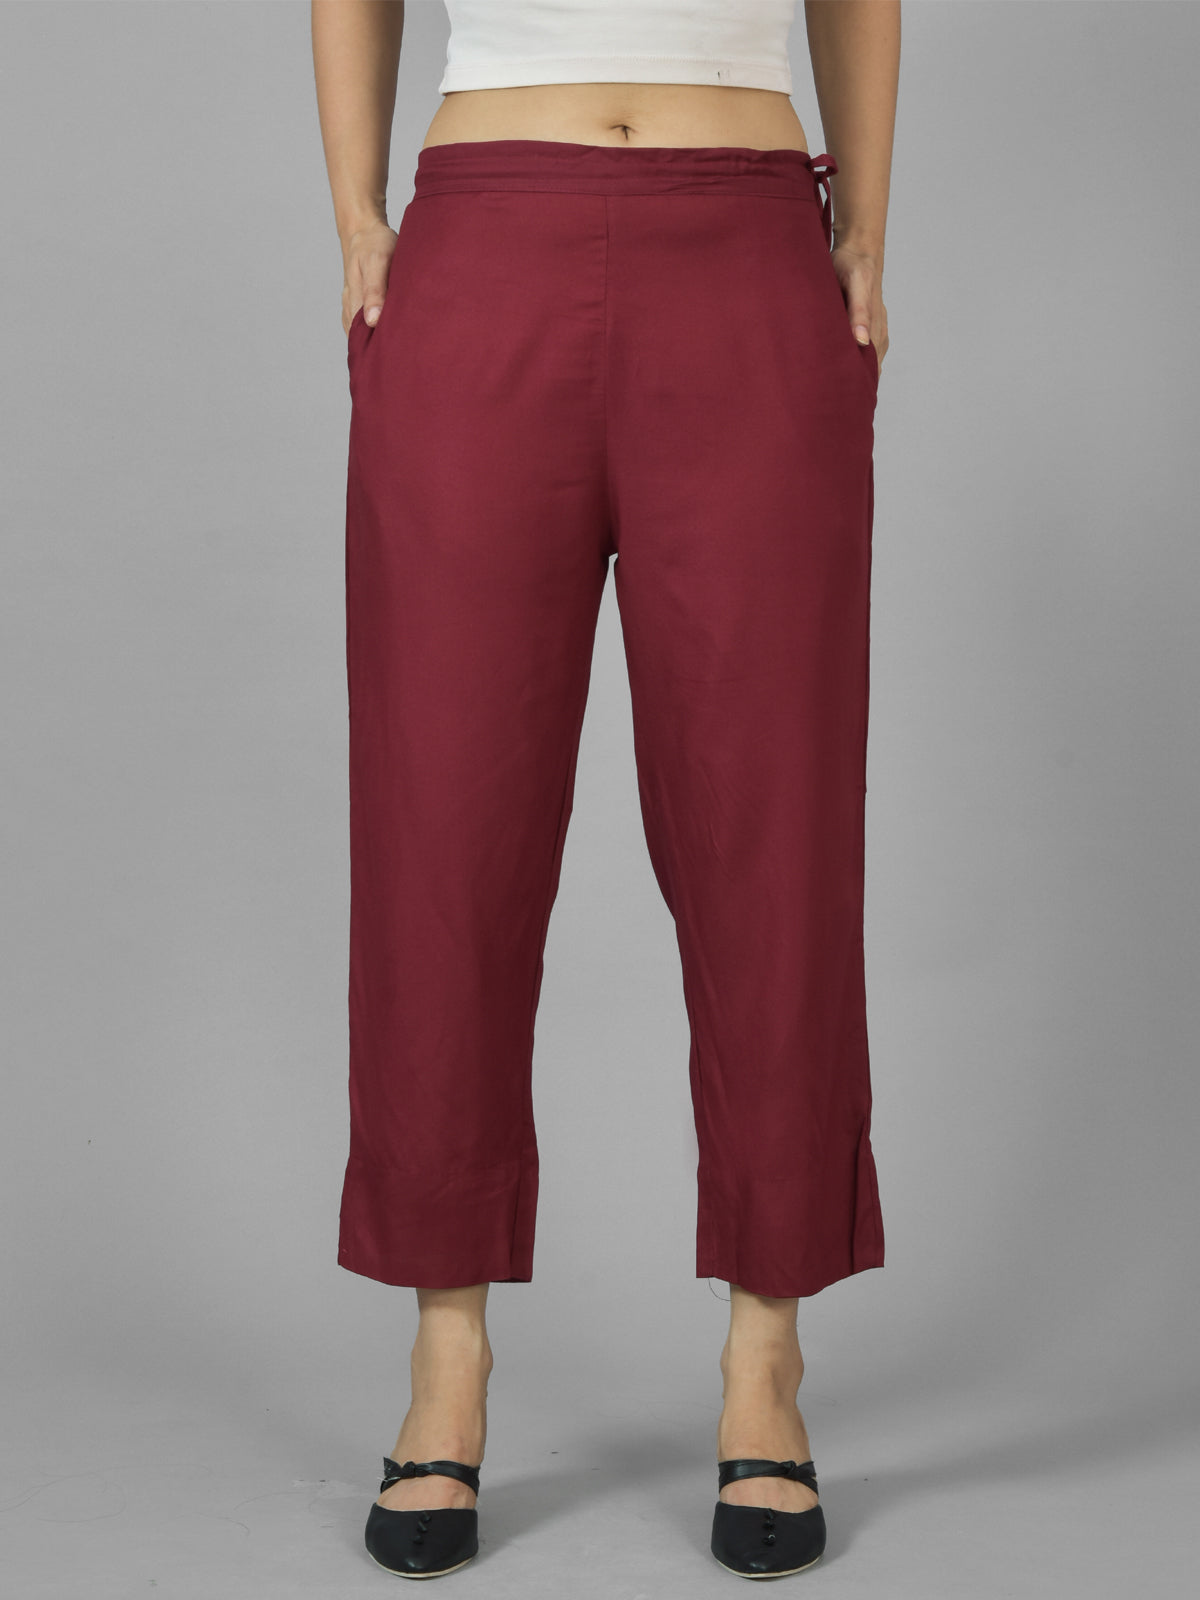 Pack Of 2 Womens Rani Pink And Wine Ankle Length Rayon Culottes Trouser Combo